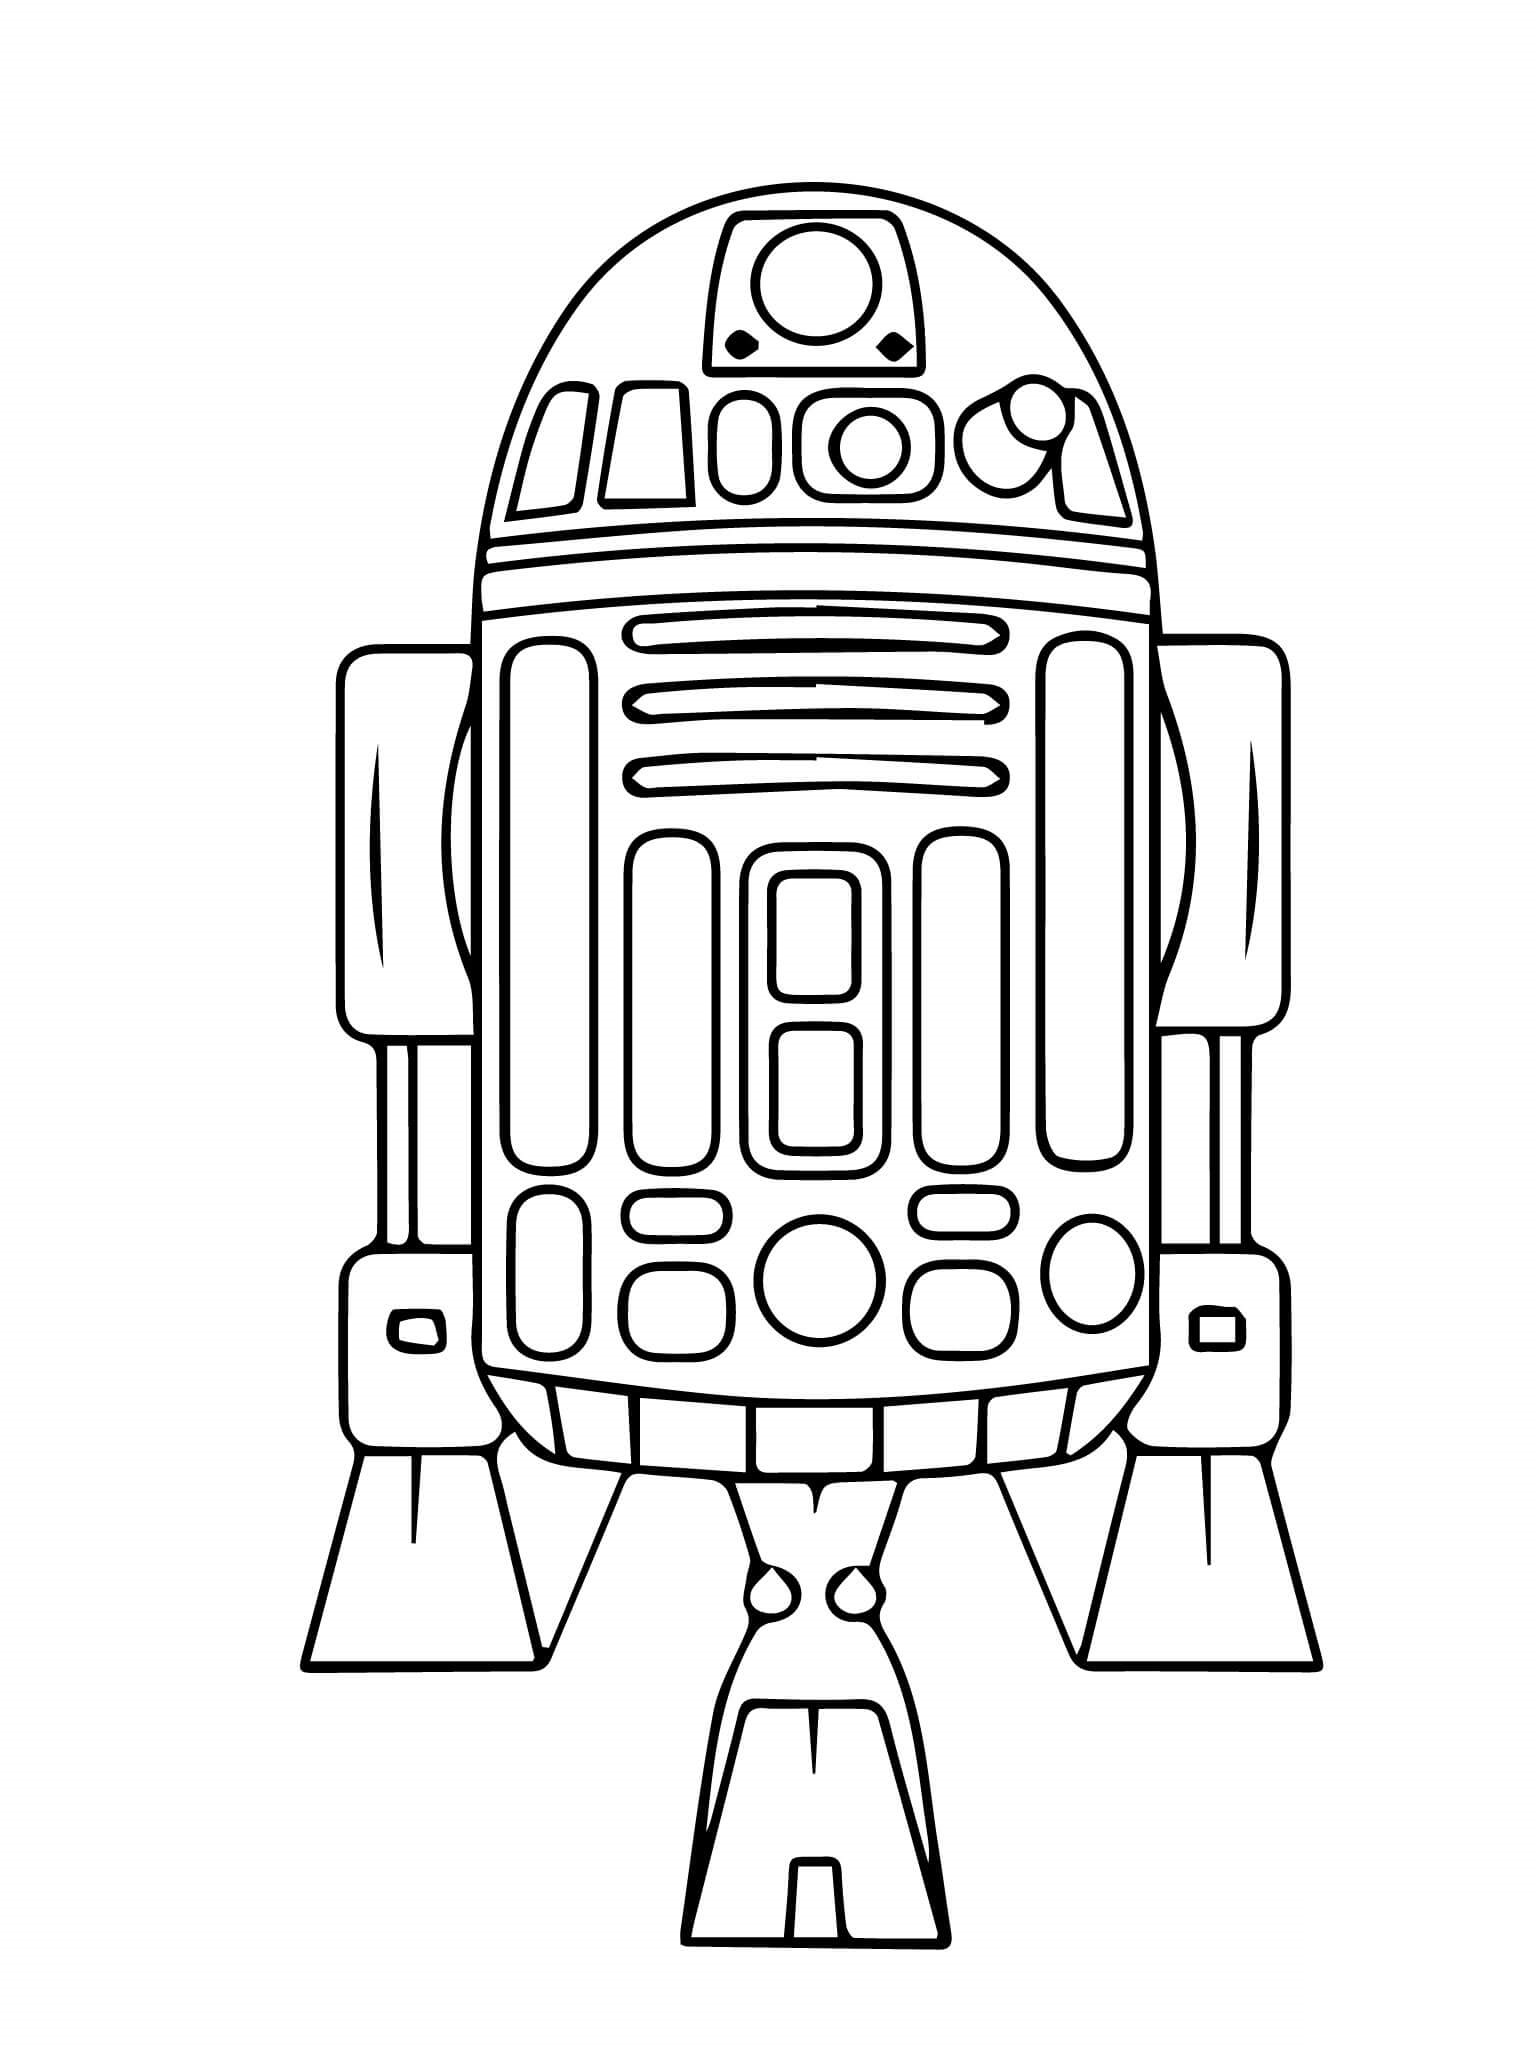 Astromech Droid R2d2 Star Wars Episode VI Return Of The Jedi Coloring Page